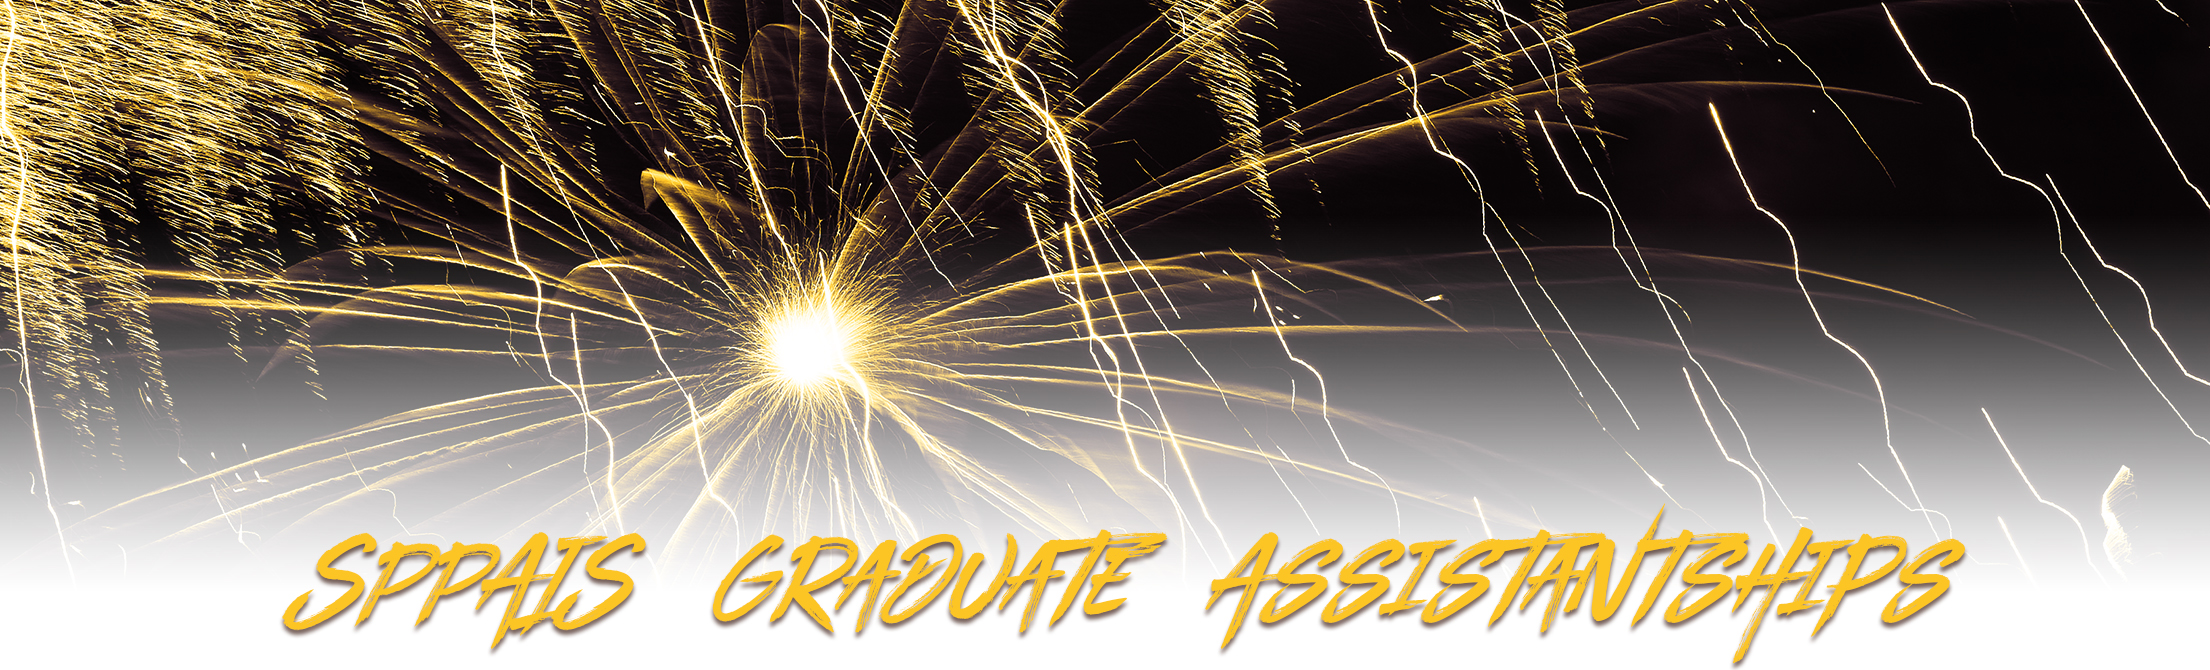 brown and gold fireworks sppais graduate assistantships school of politics public affairs and international studies